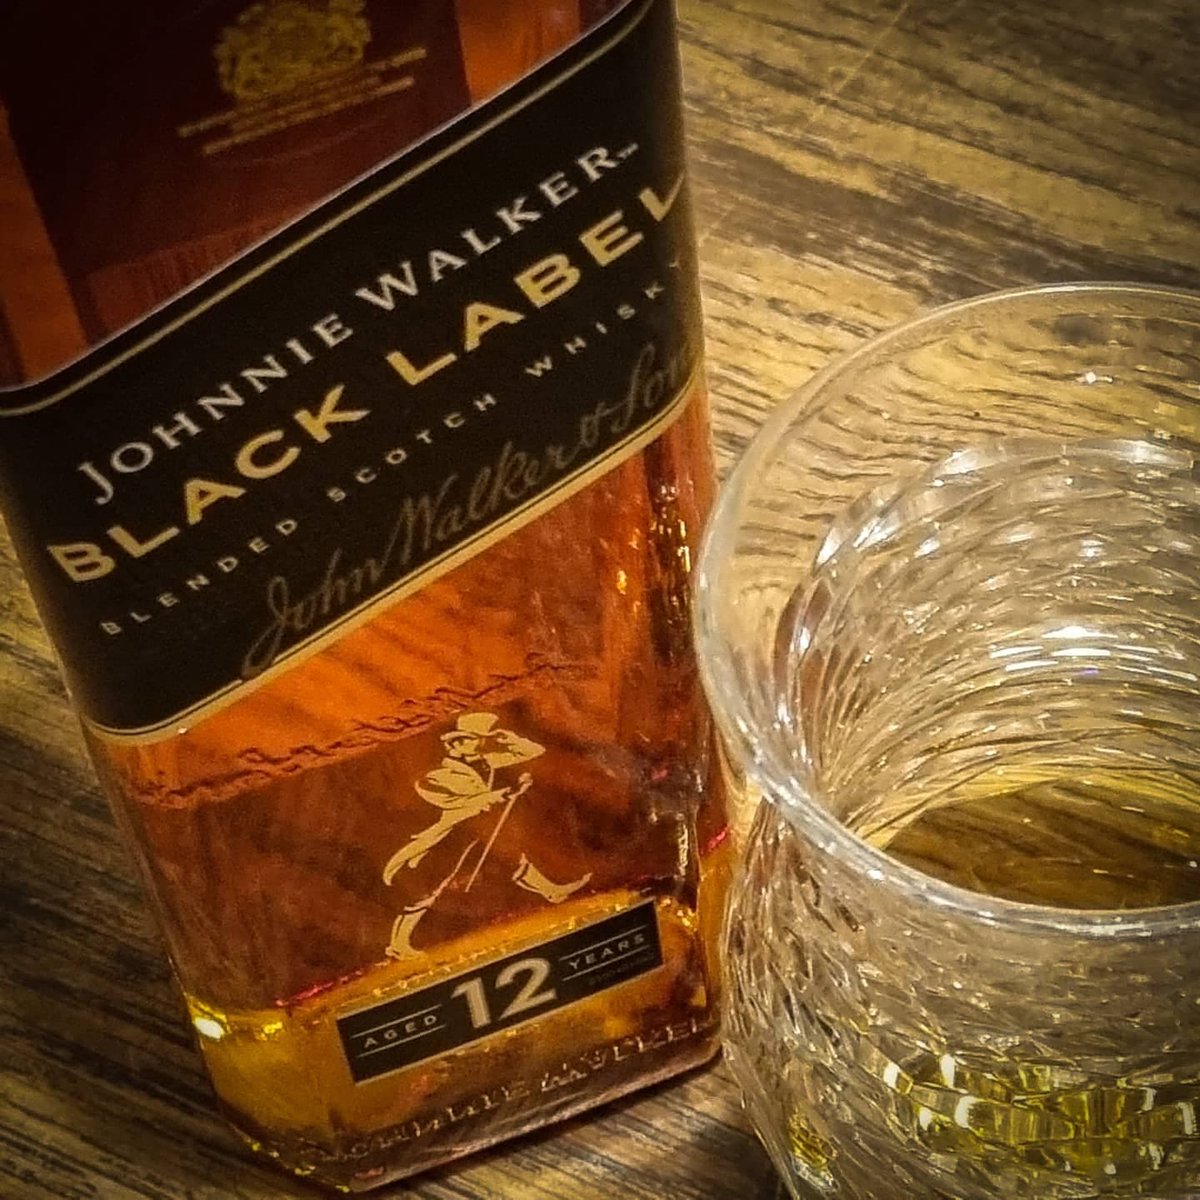 I haven't had the Johnnie Walker Black before. This is really nice. It tastes of burnt oak and, dark chocolate. Smooth. Very reasonably priced. Glass from the guys in Dingle Crystal always a touch of class. #johnniewalkerblack #johnniewalker